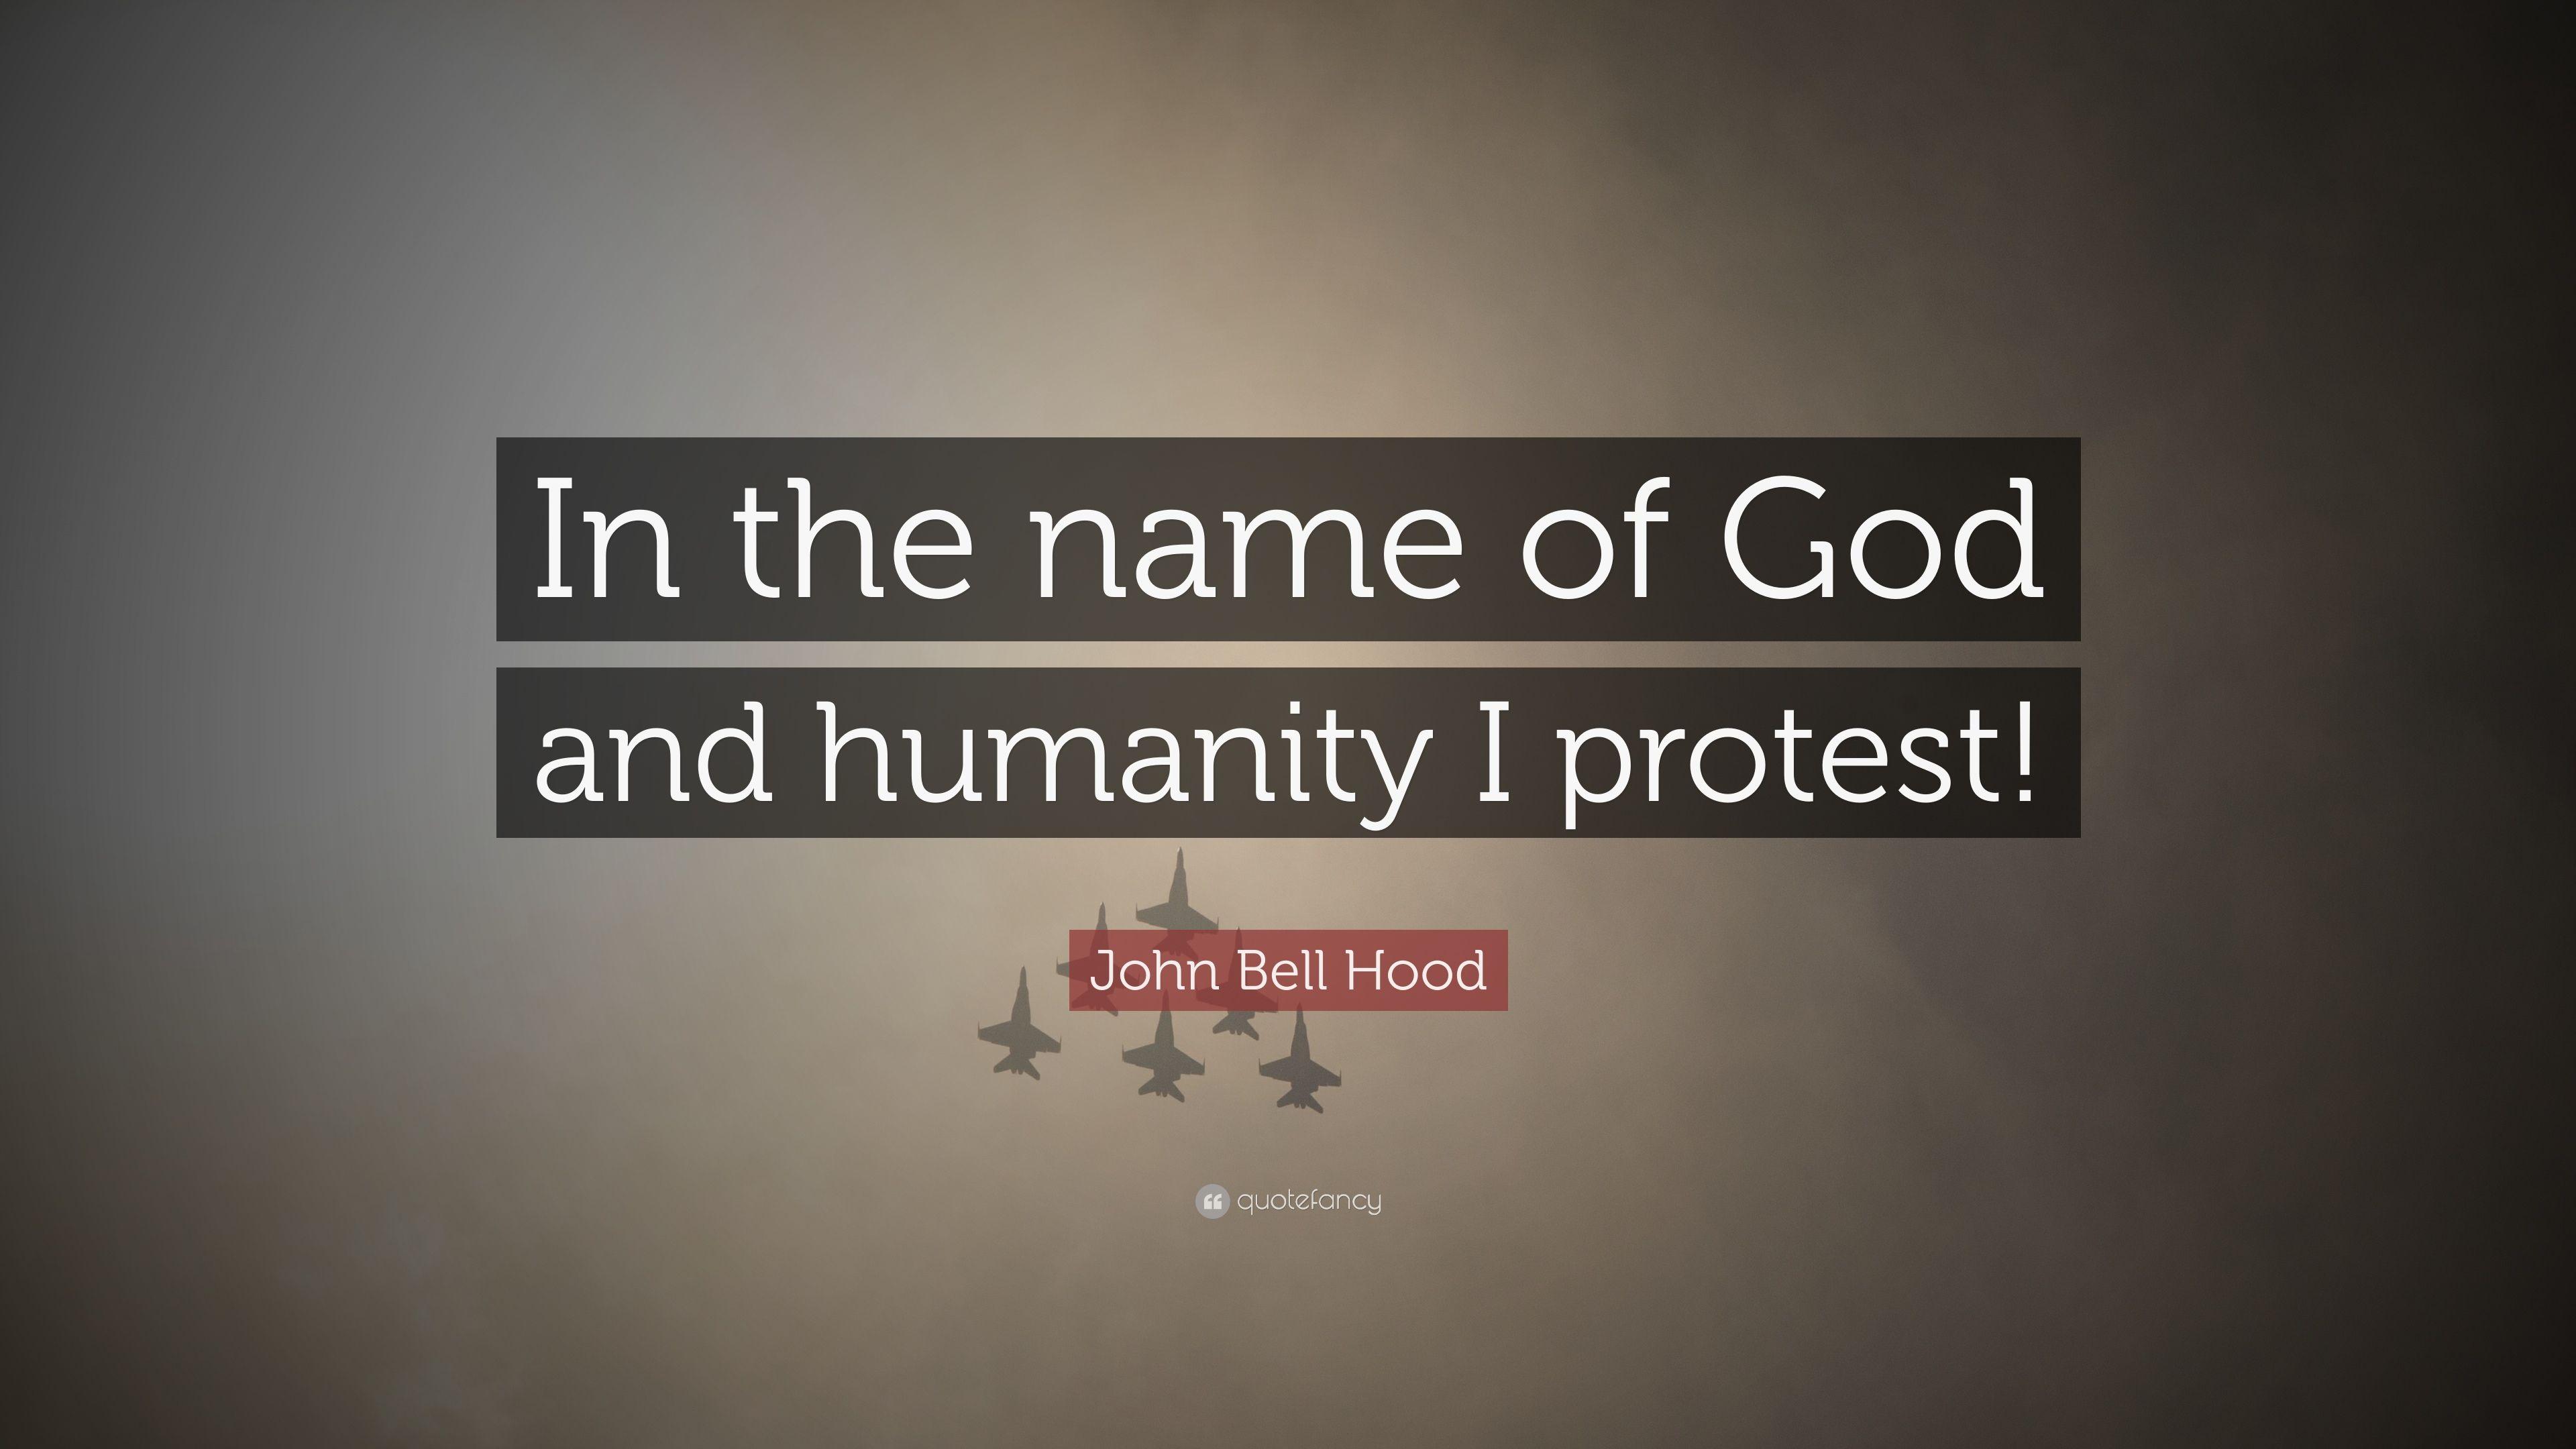 John Bell Hood Quote: “In the name of God and humanity I protest